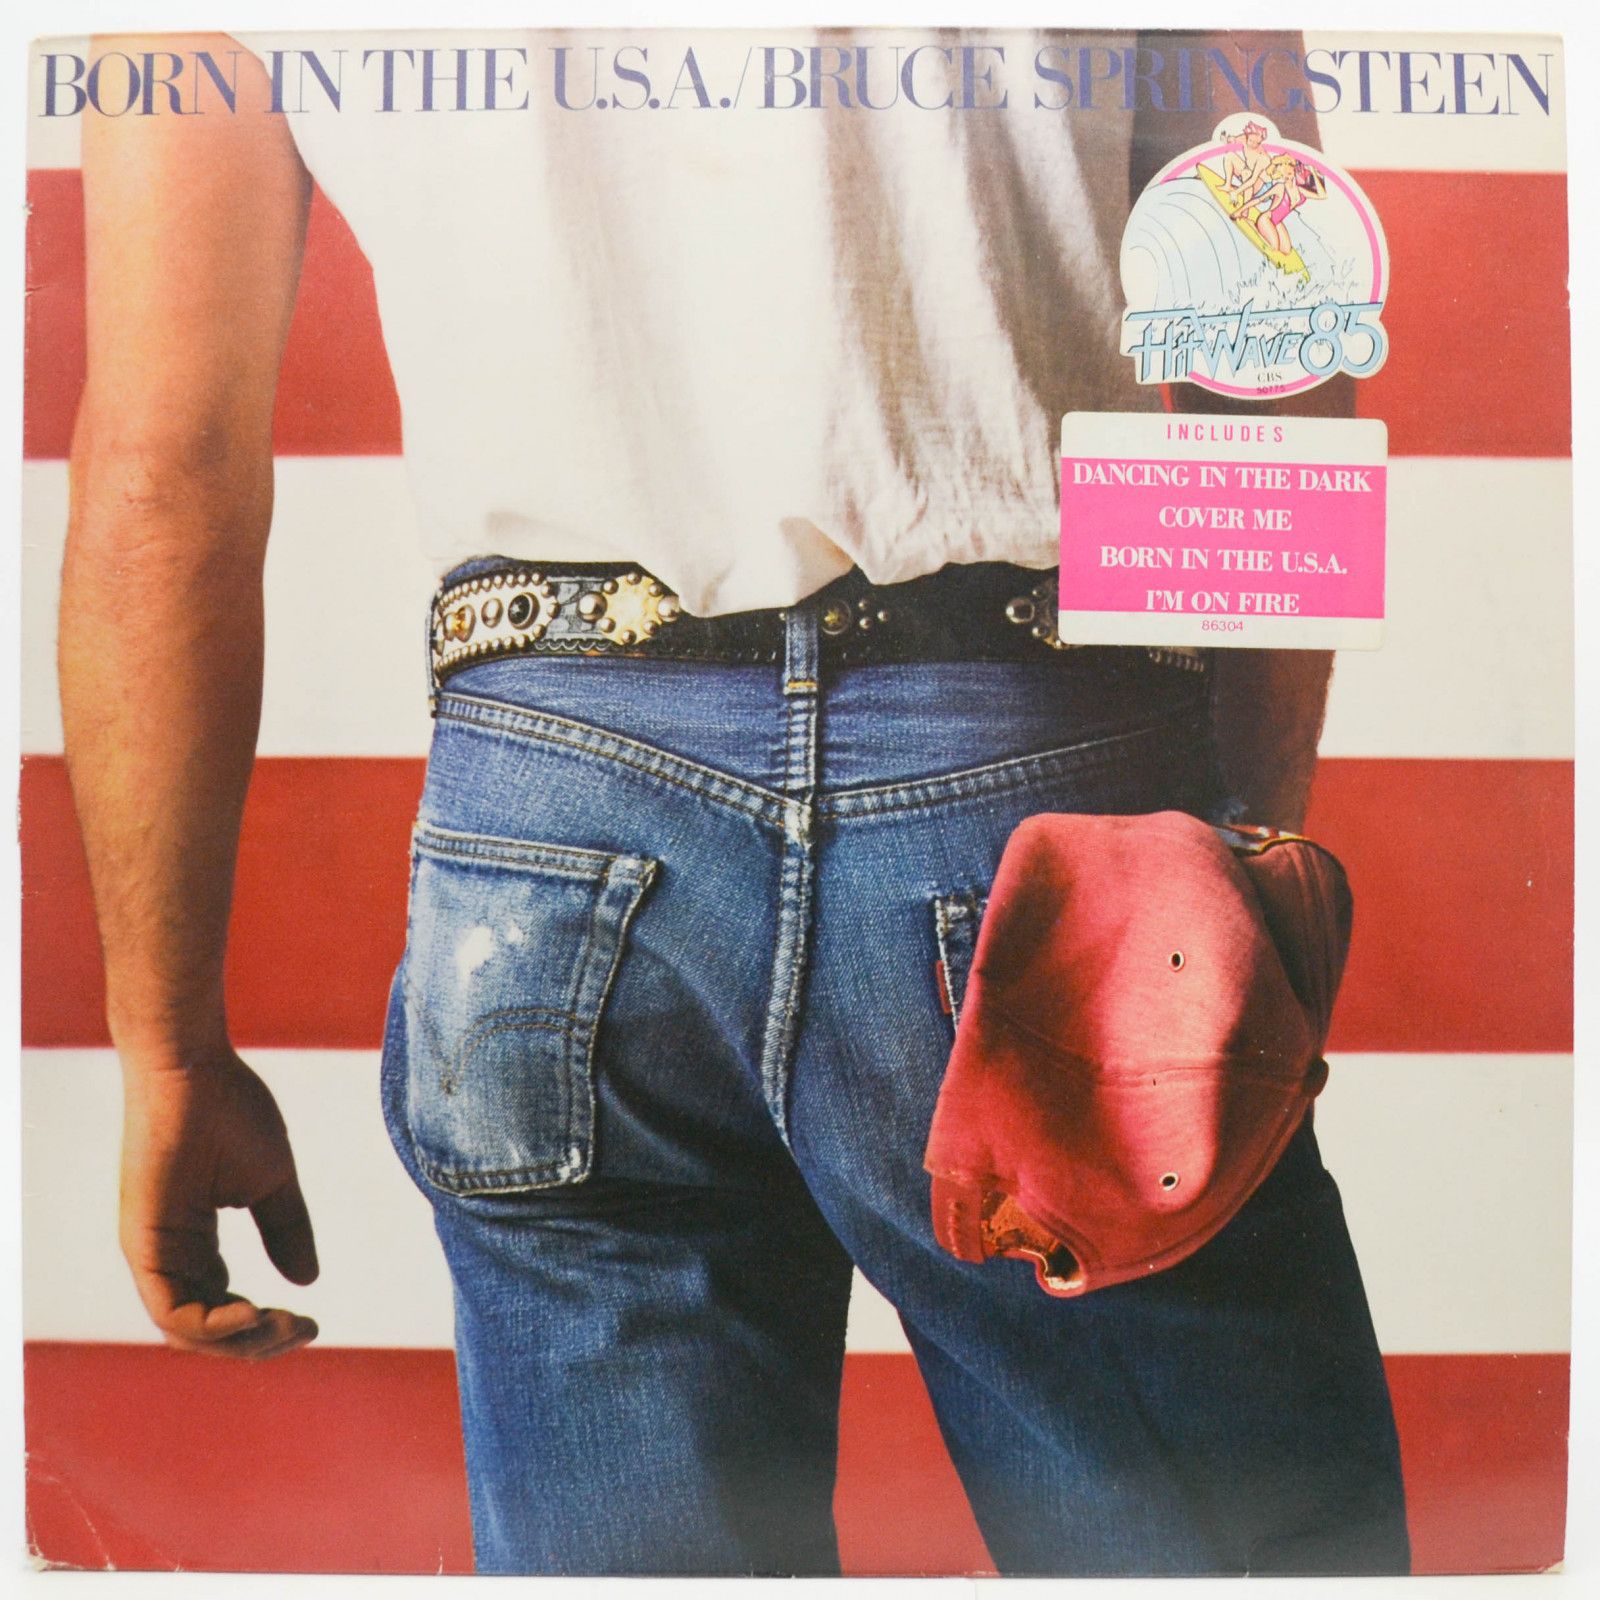 Bruce Springsteen — Born in the USA, 1984